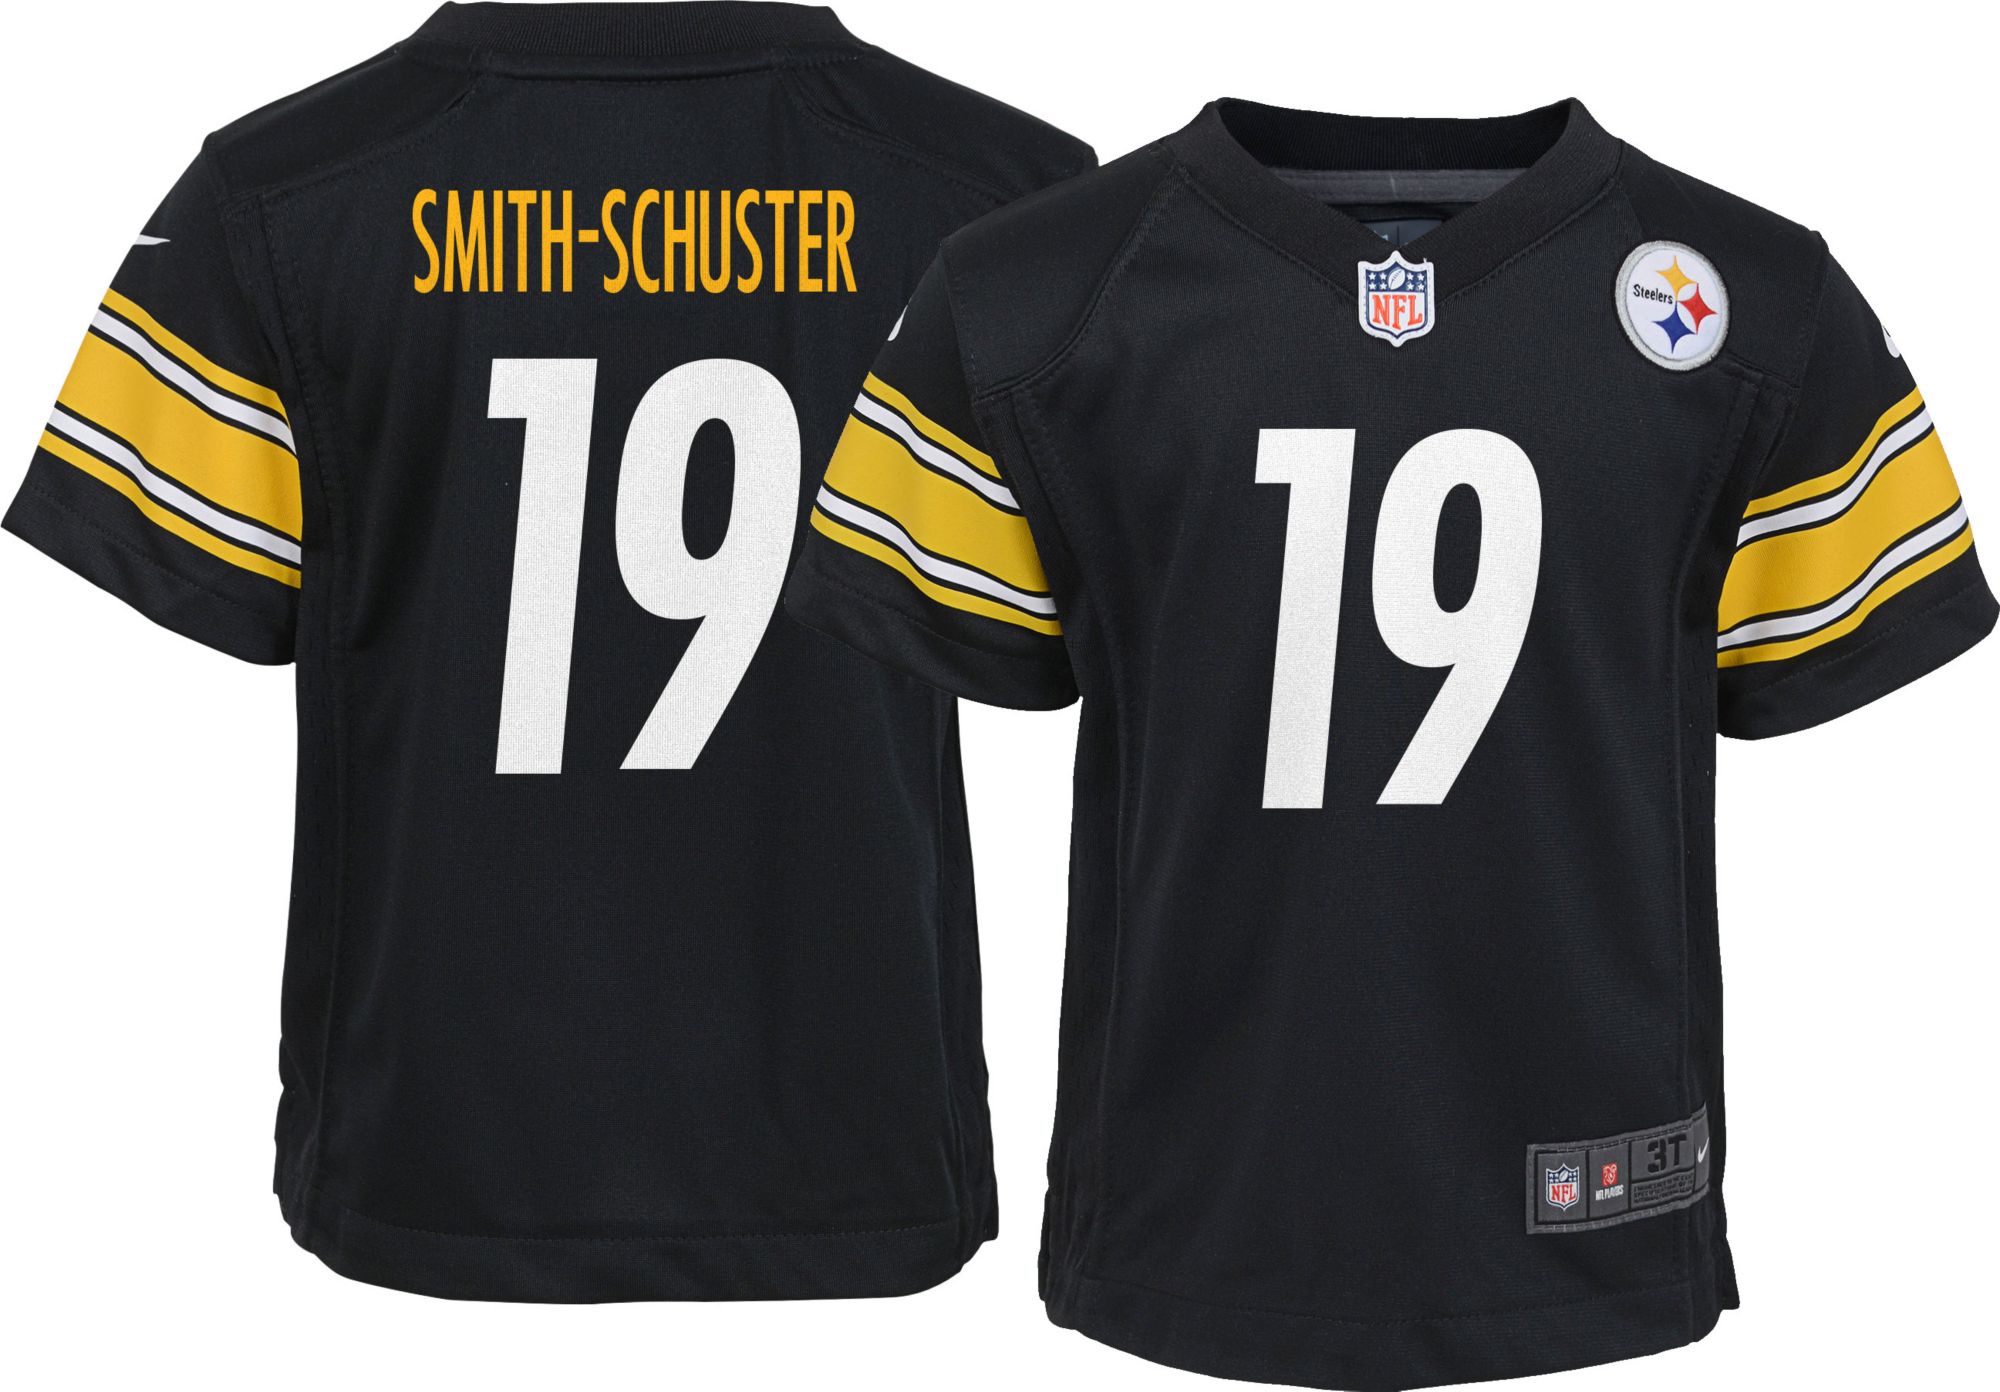 number 19 steelers jersey